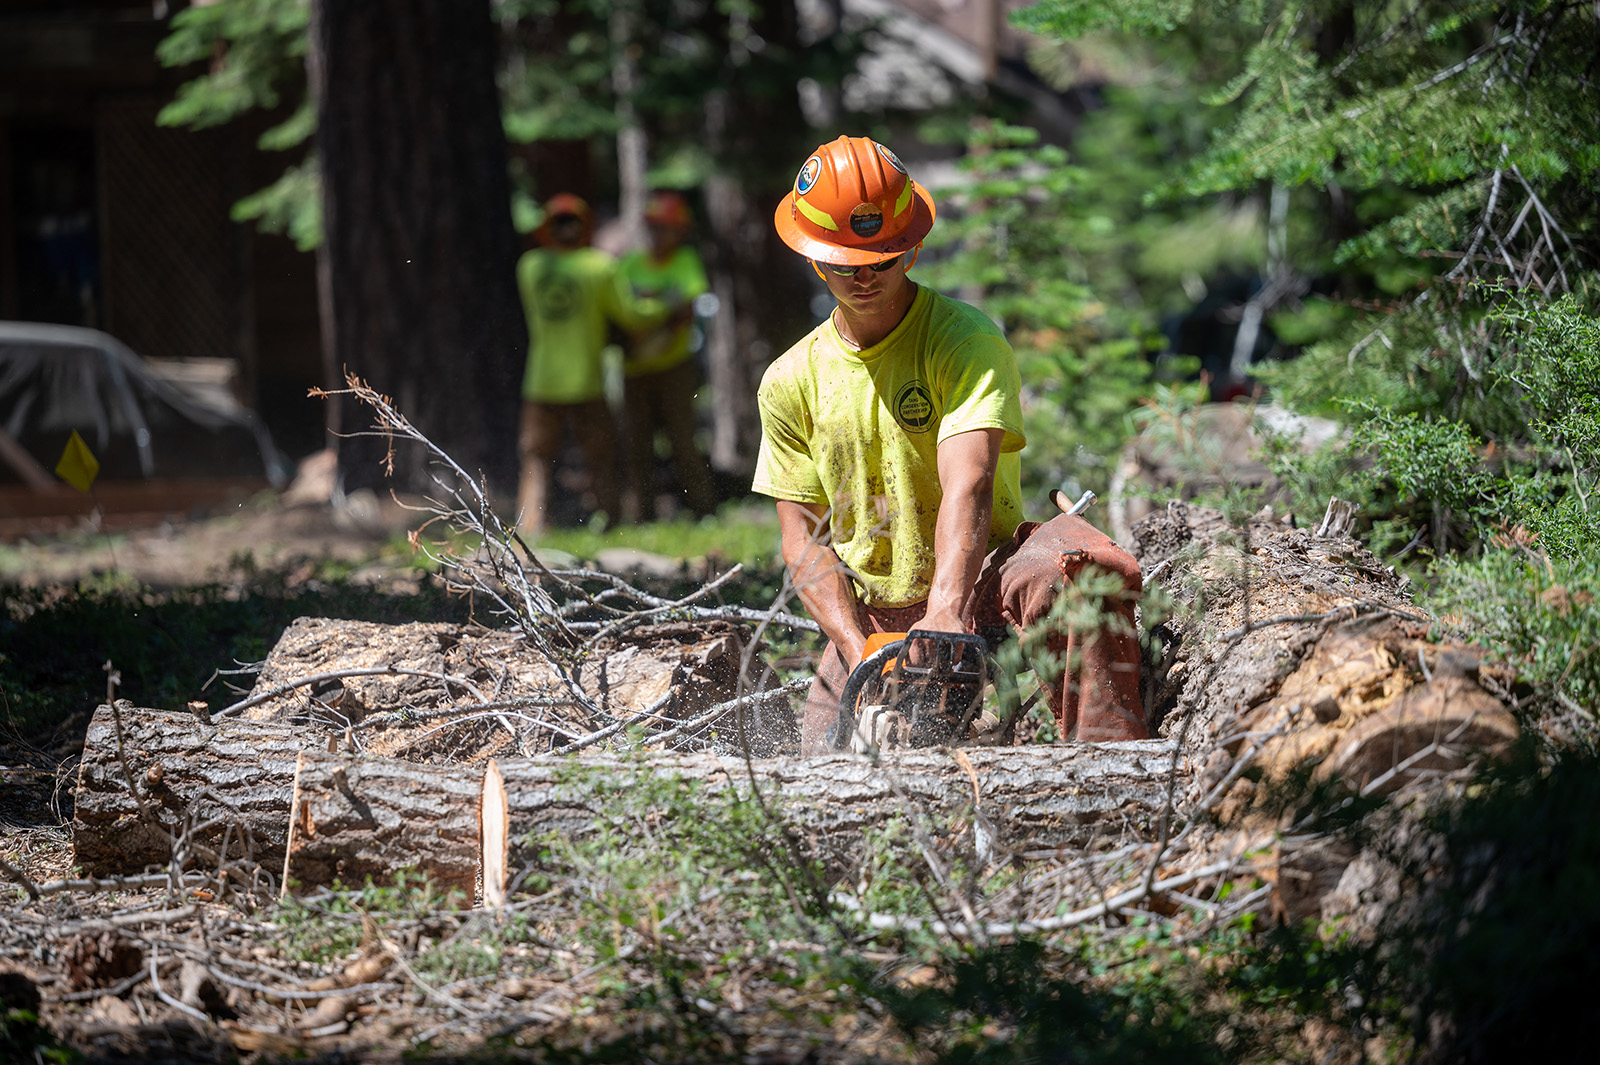 A crew member cuts a downed tree into rounds for fuelwood.